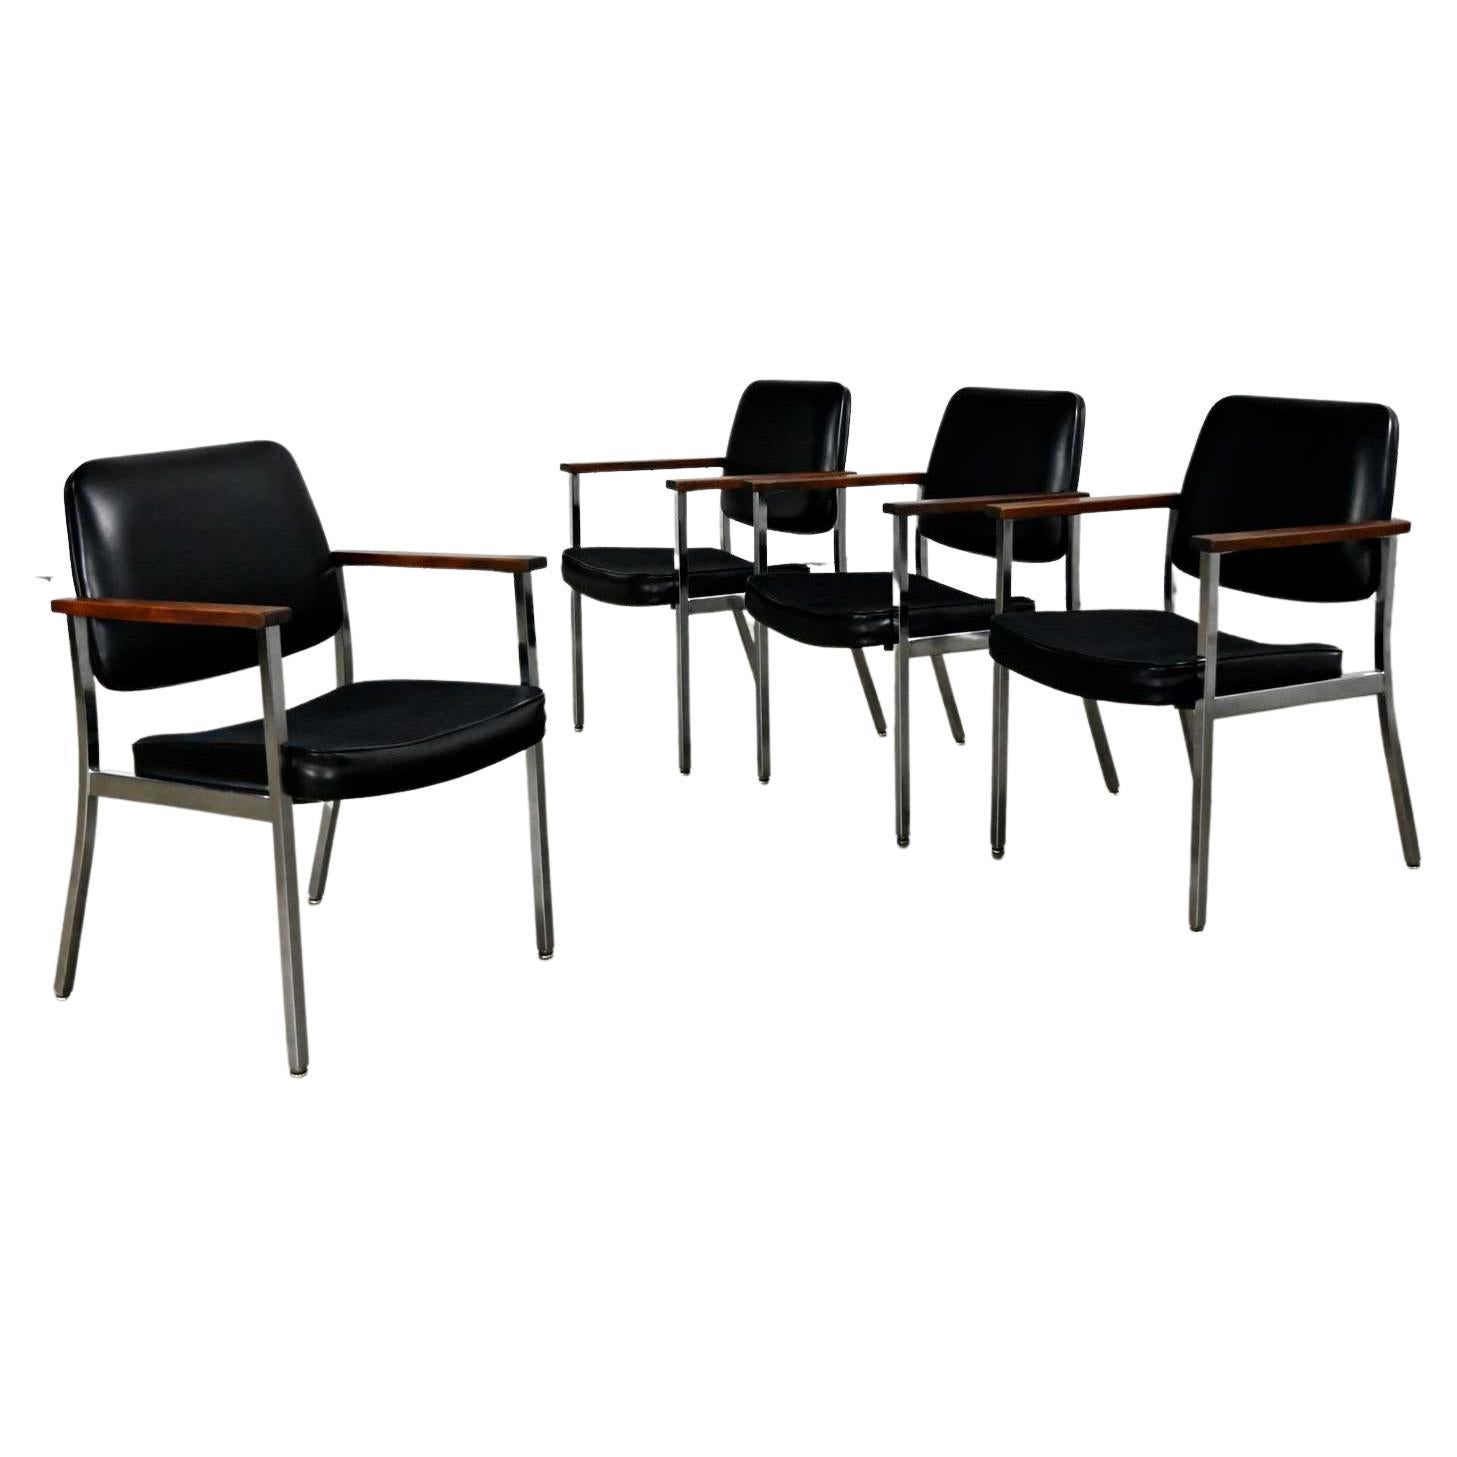 Mid Century Industrial Chrome & Black Vinyl Wood Arms Dining Office Chairs Set 4 For Sale